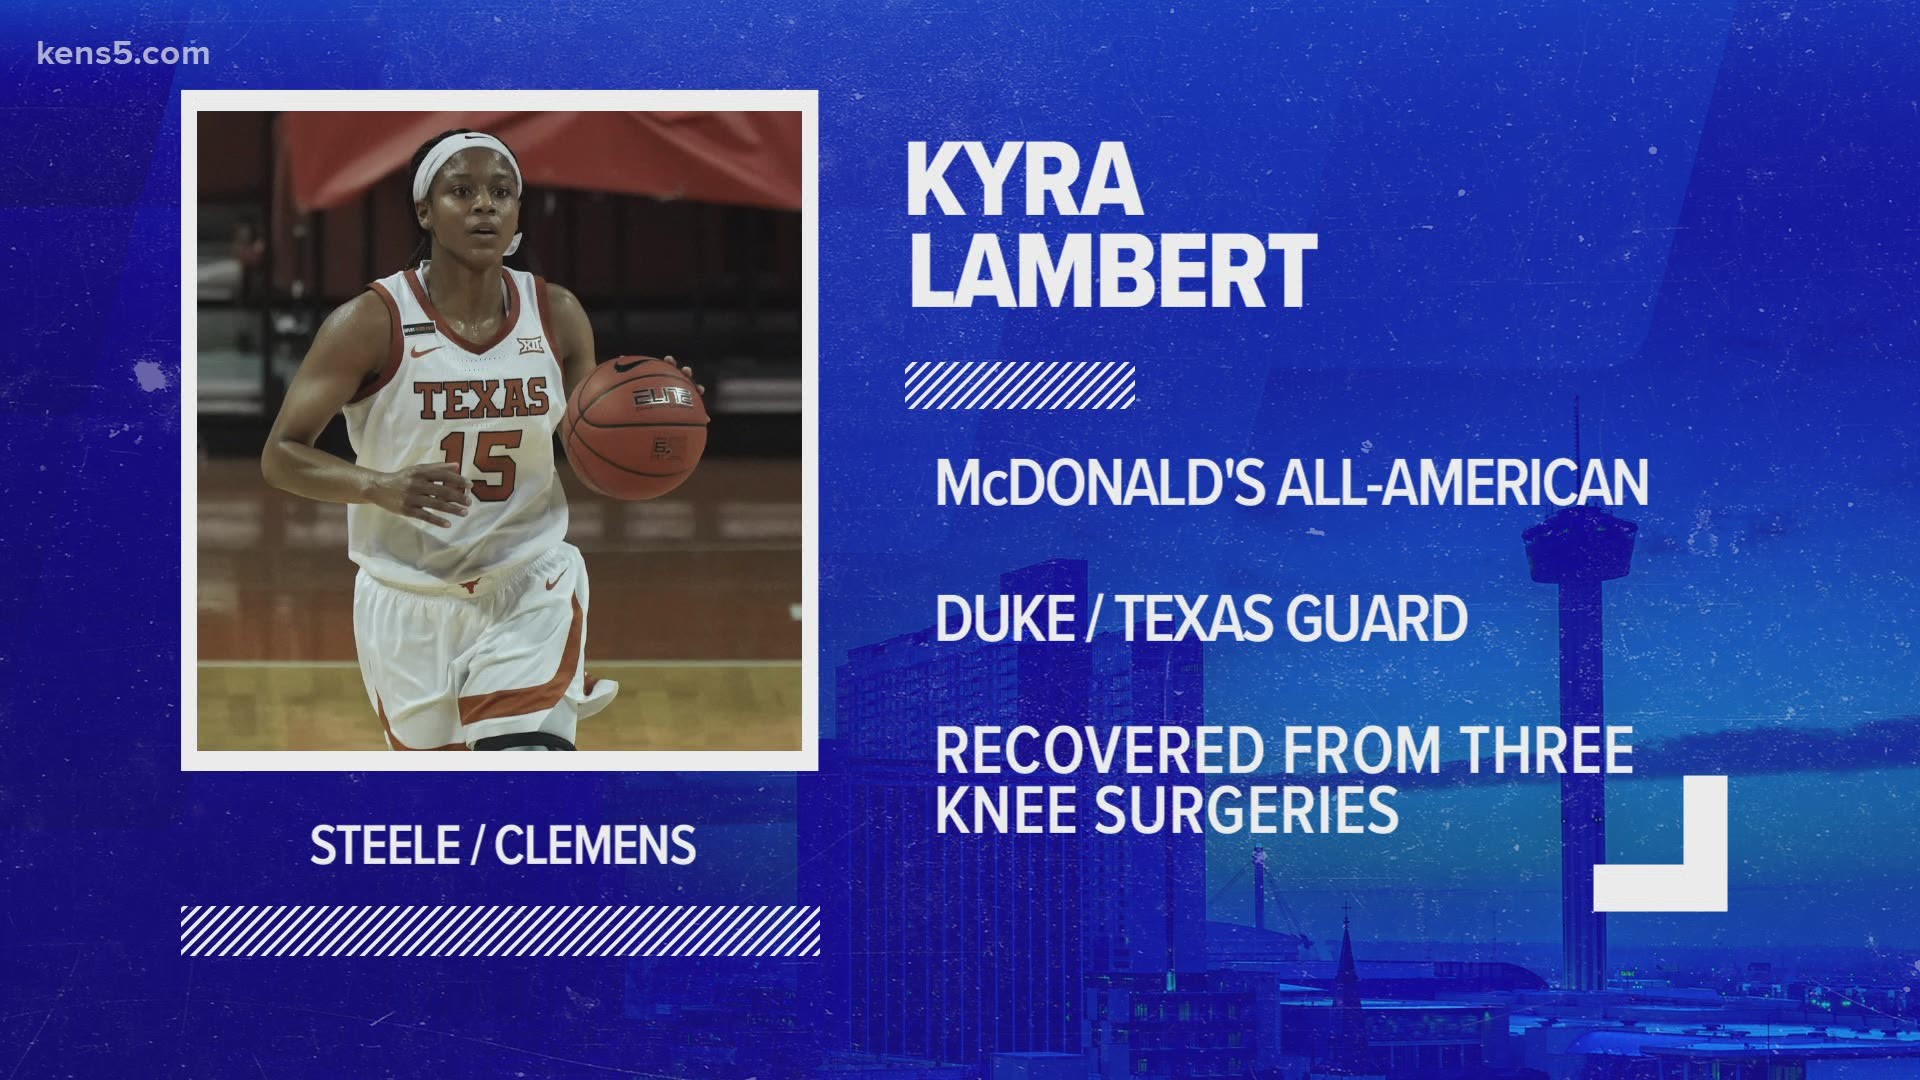 The Steele and Clemens high school alumna was a top-10 recruit in the entire country, but college play brought some injury challenges. She would persevere.